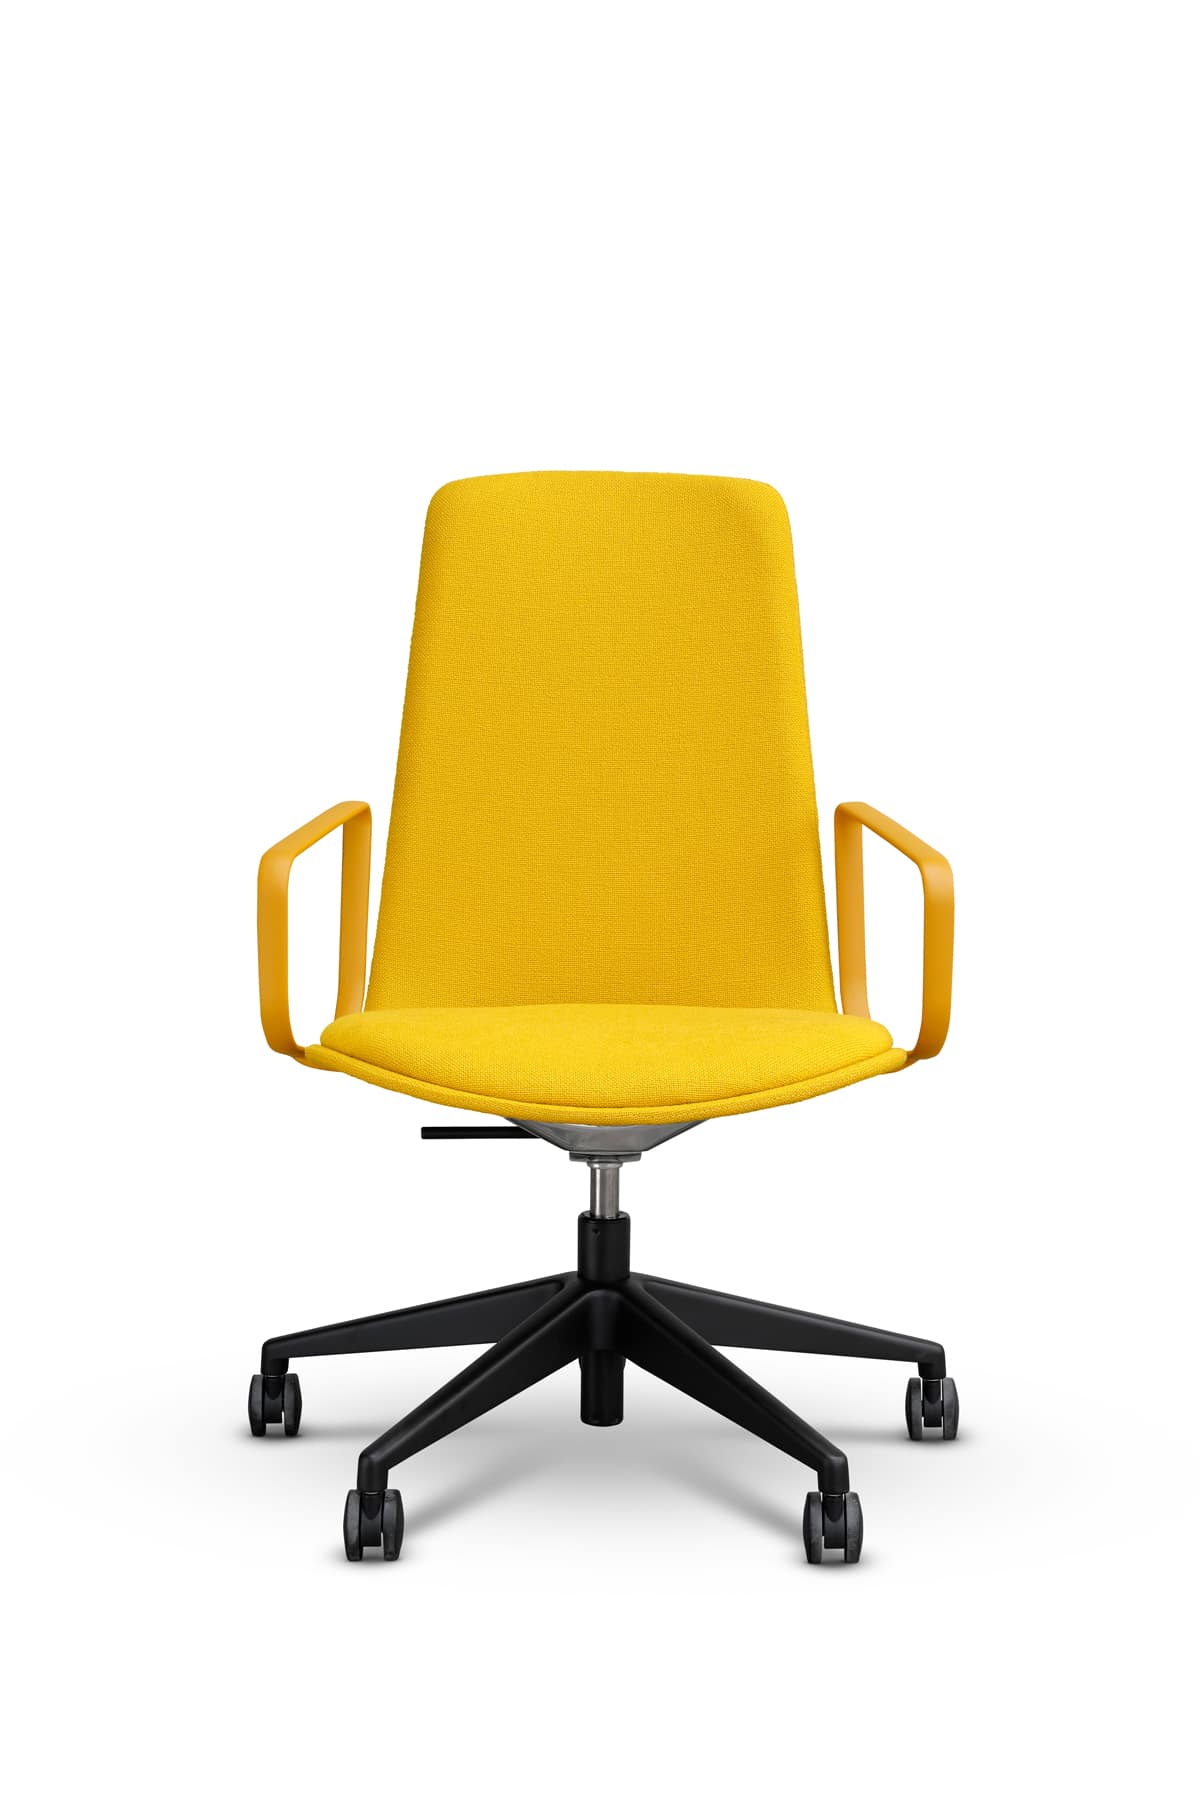 Lottus Conference office chair